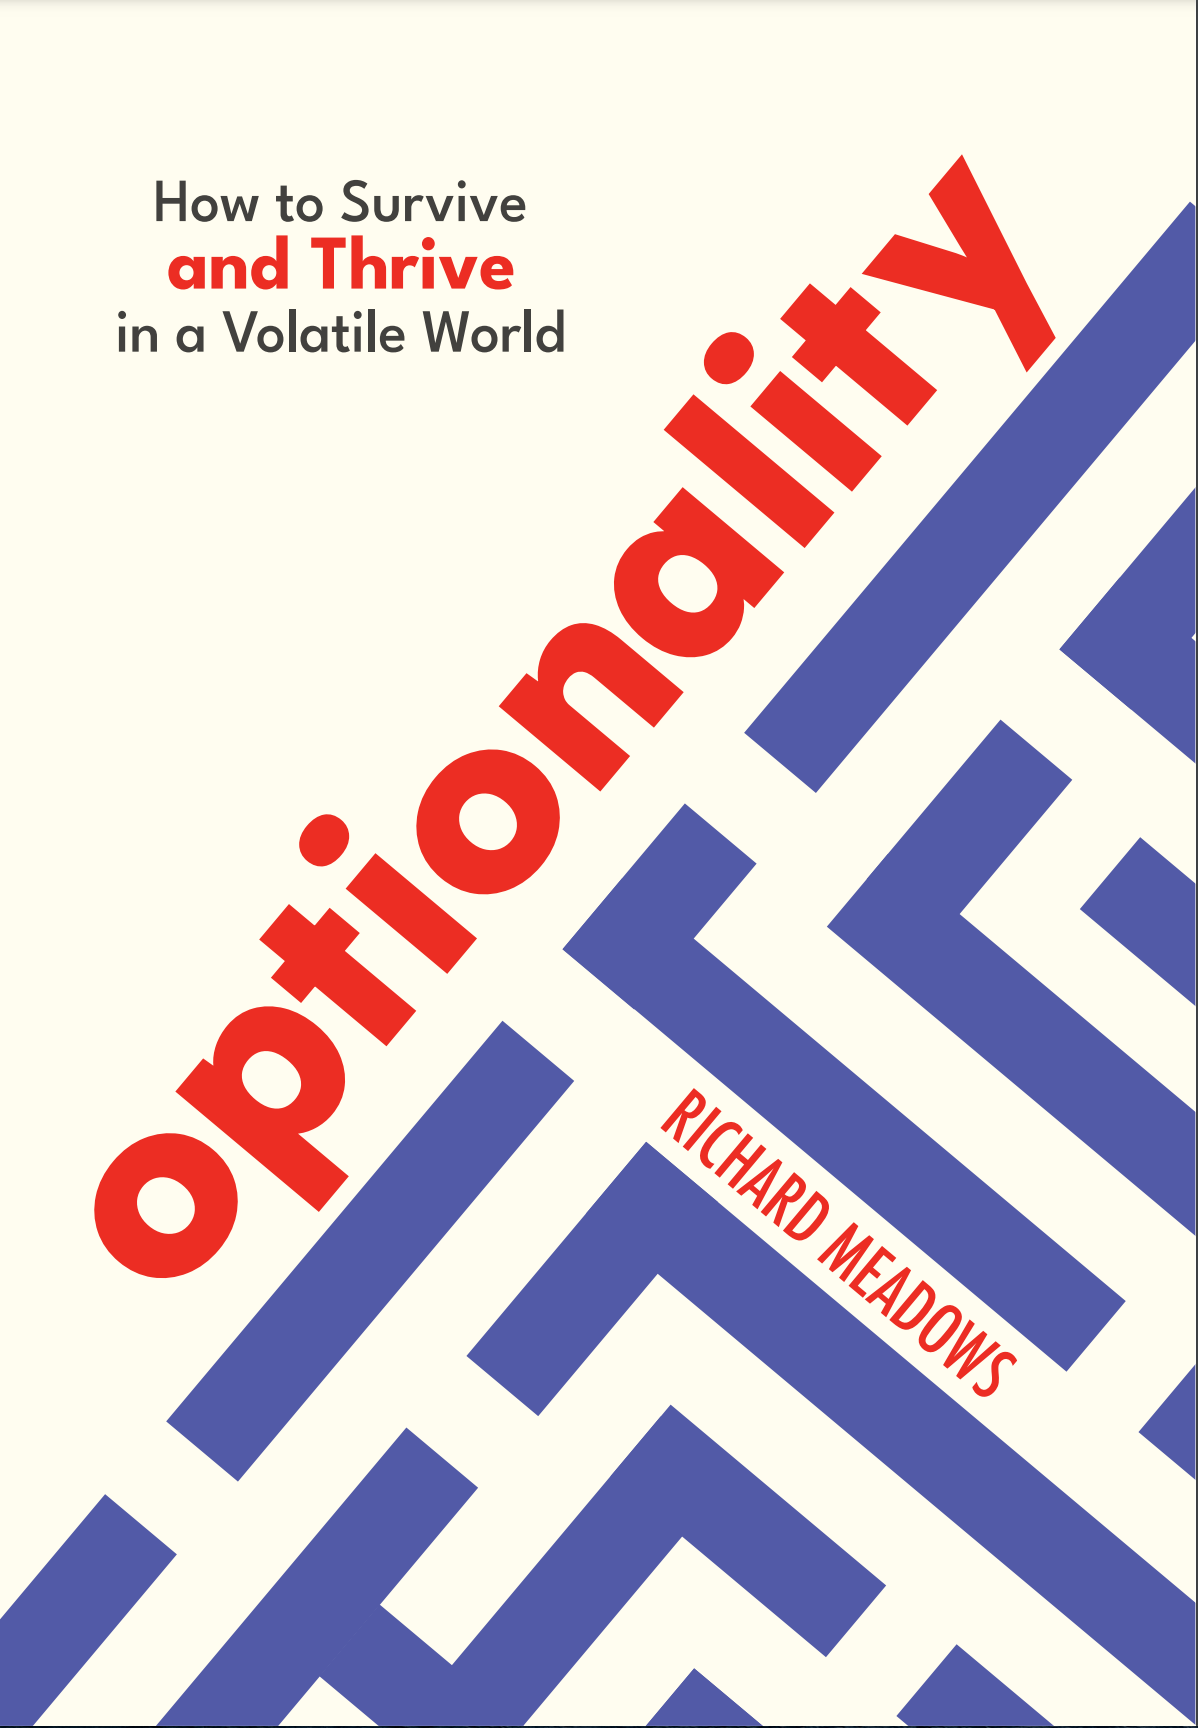 Optionality: How to Survive and Thrive in a Volatile World PDF Download